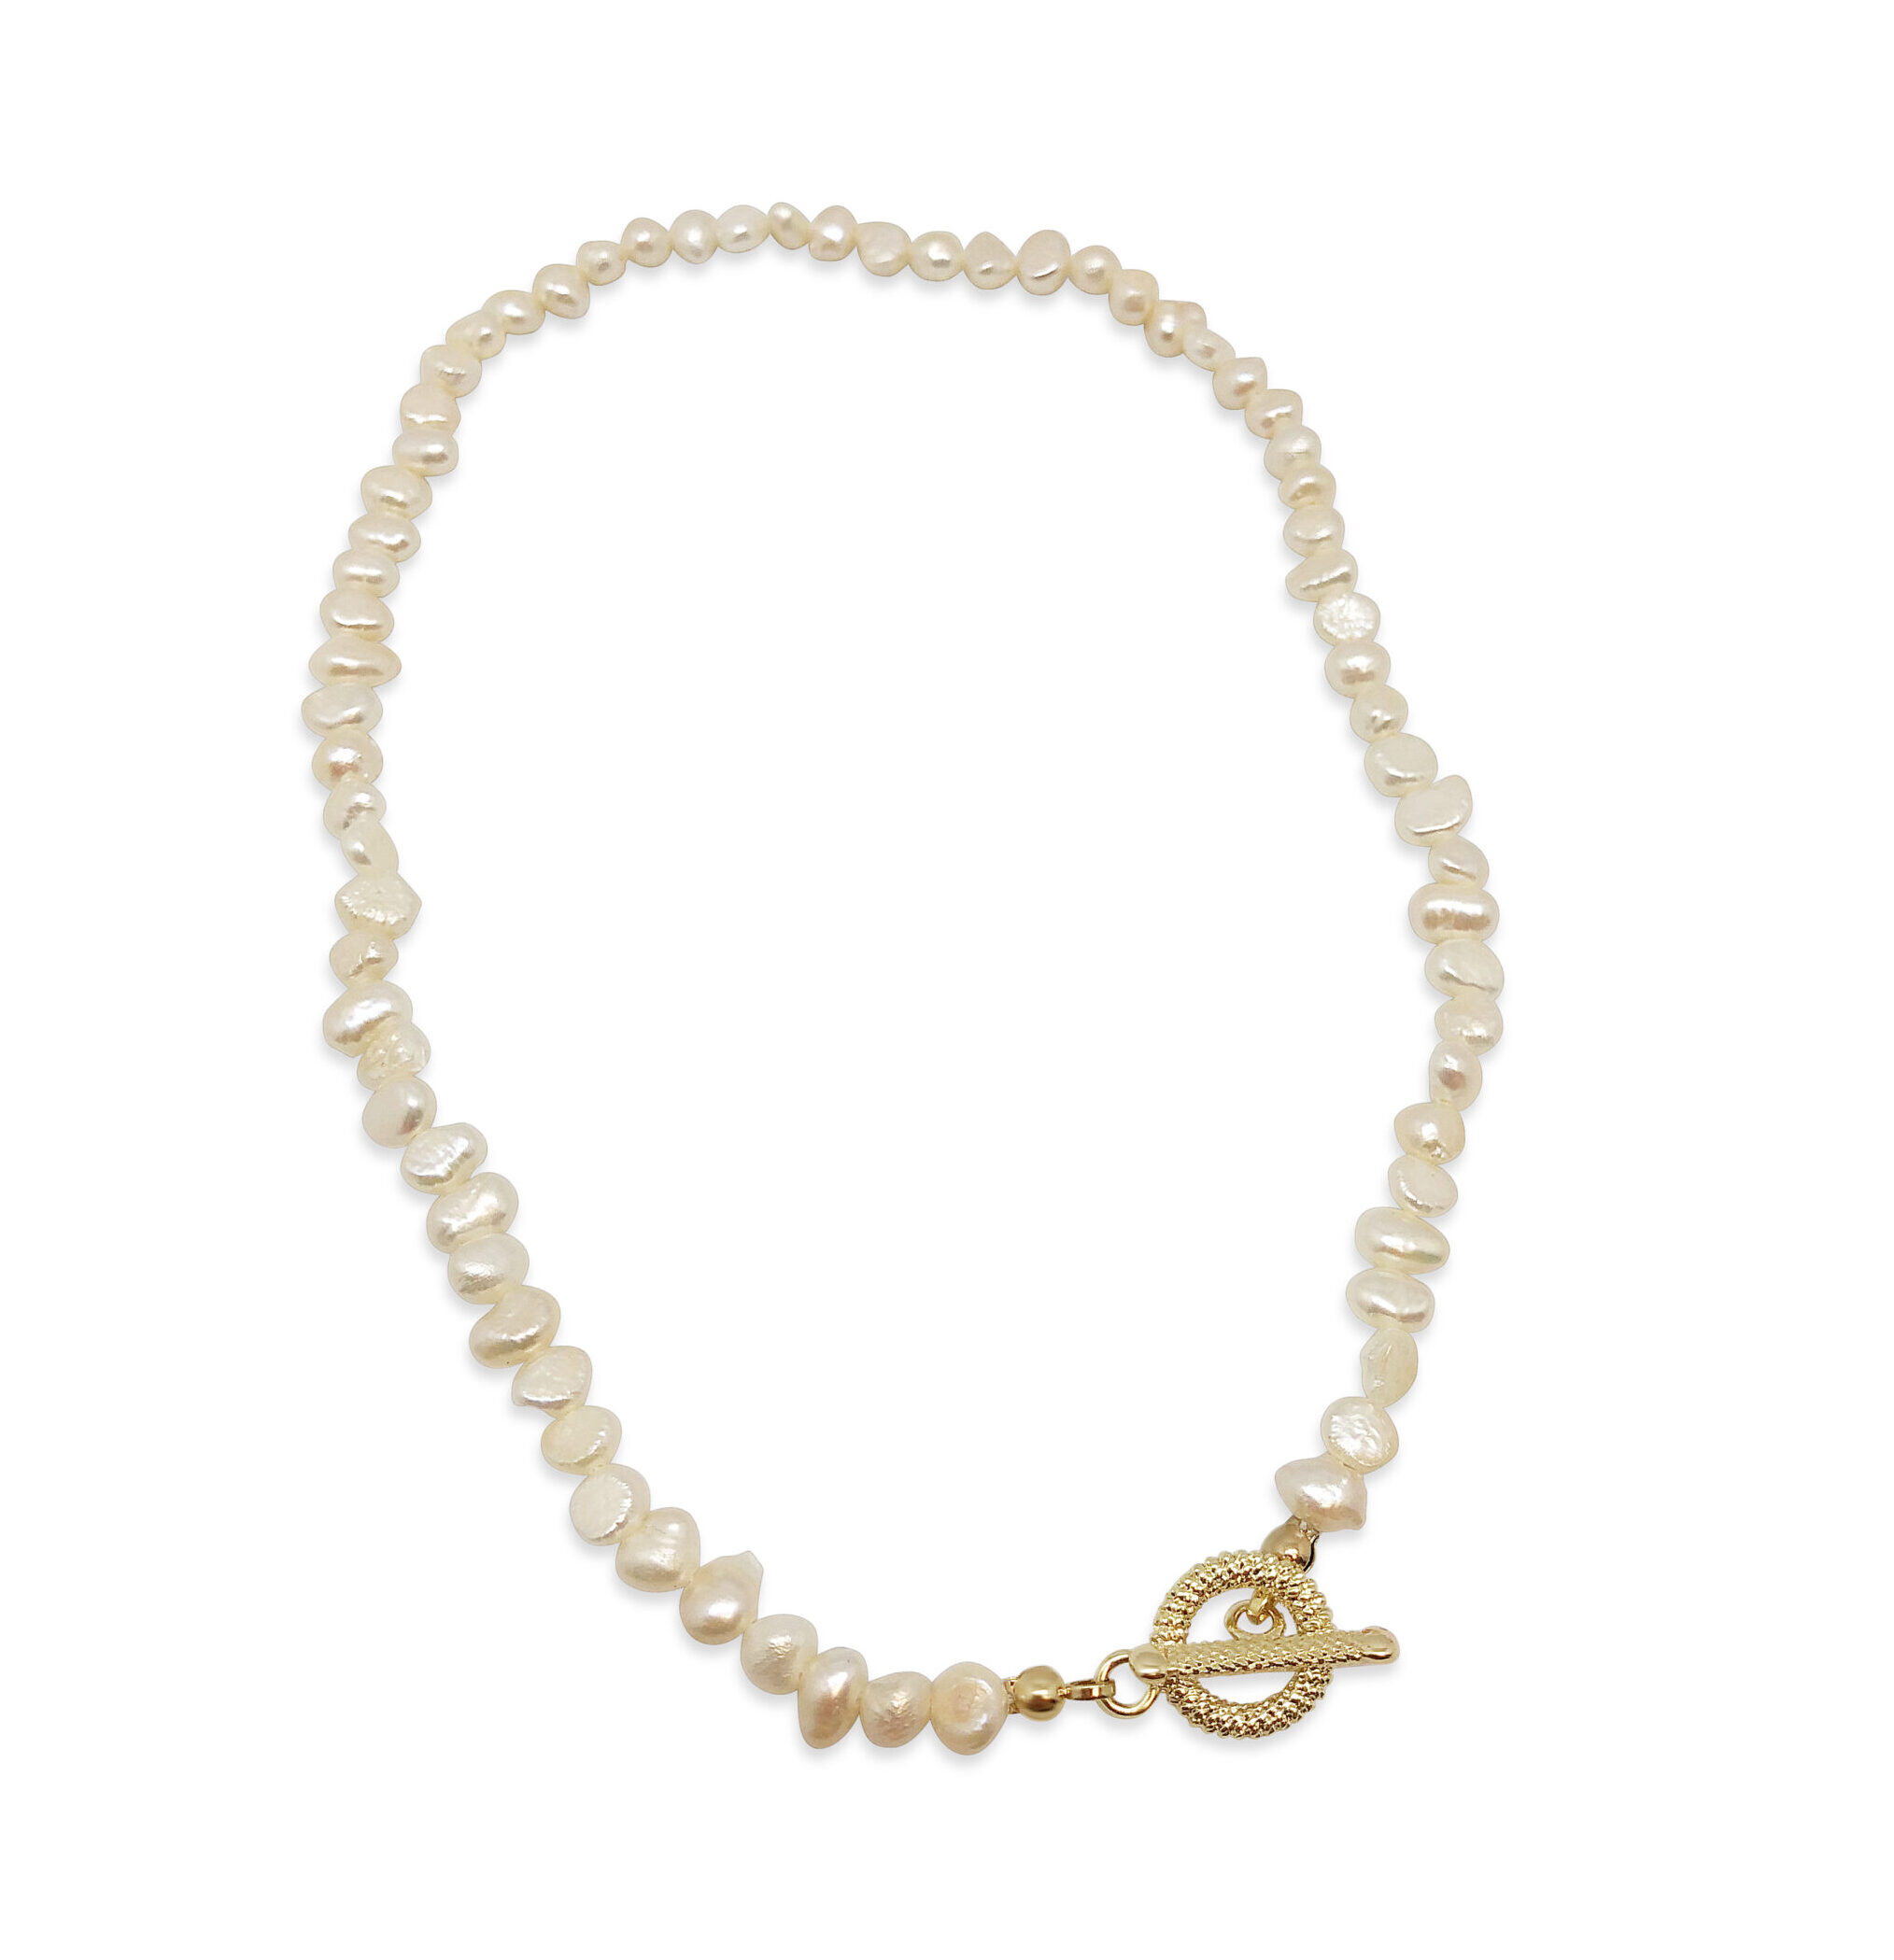 Fresh Water Pearl Fob Necklace | Coraline -J eanette Maree